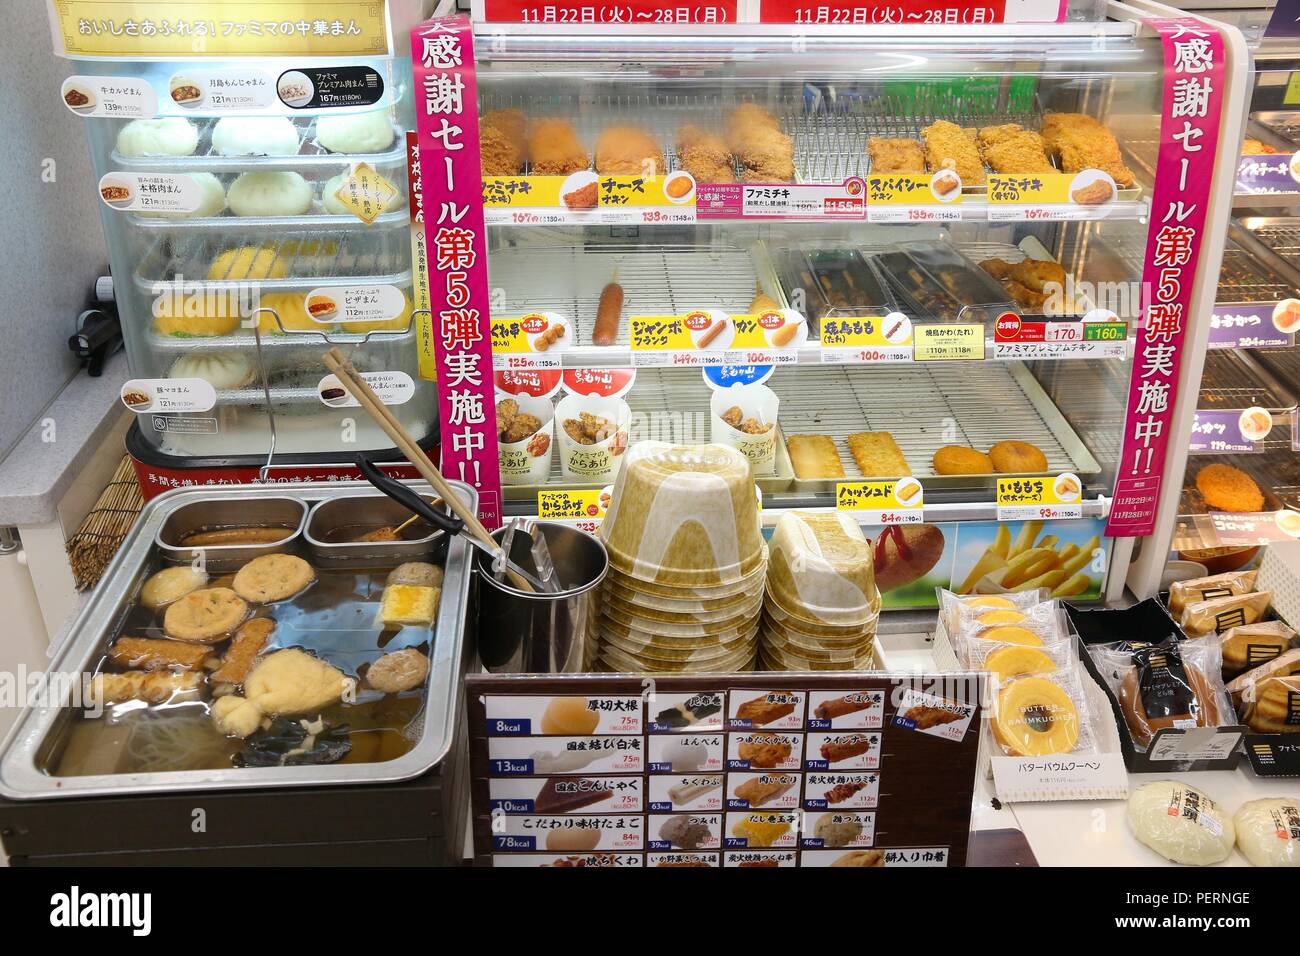 https://c8.alamy.com/comp/PERNGE/tokyo-japan-december-2-2016-typical-japanese-convenience-store-fast-food-set-in-tokyo-nikuman-steamed-buns-oden-broth-winter-foods-and-choice-o-PERNGE.jpg